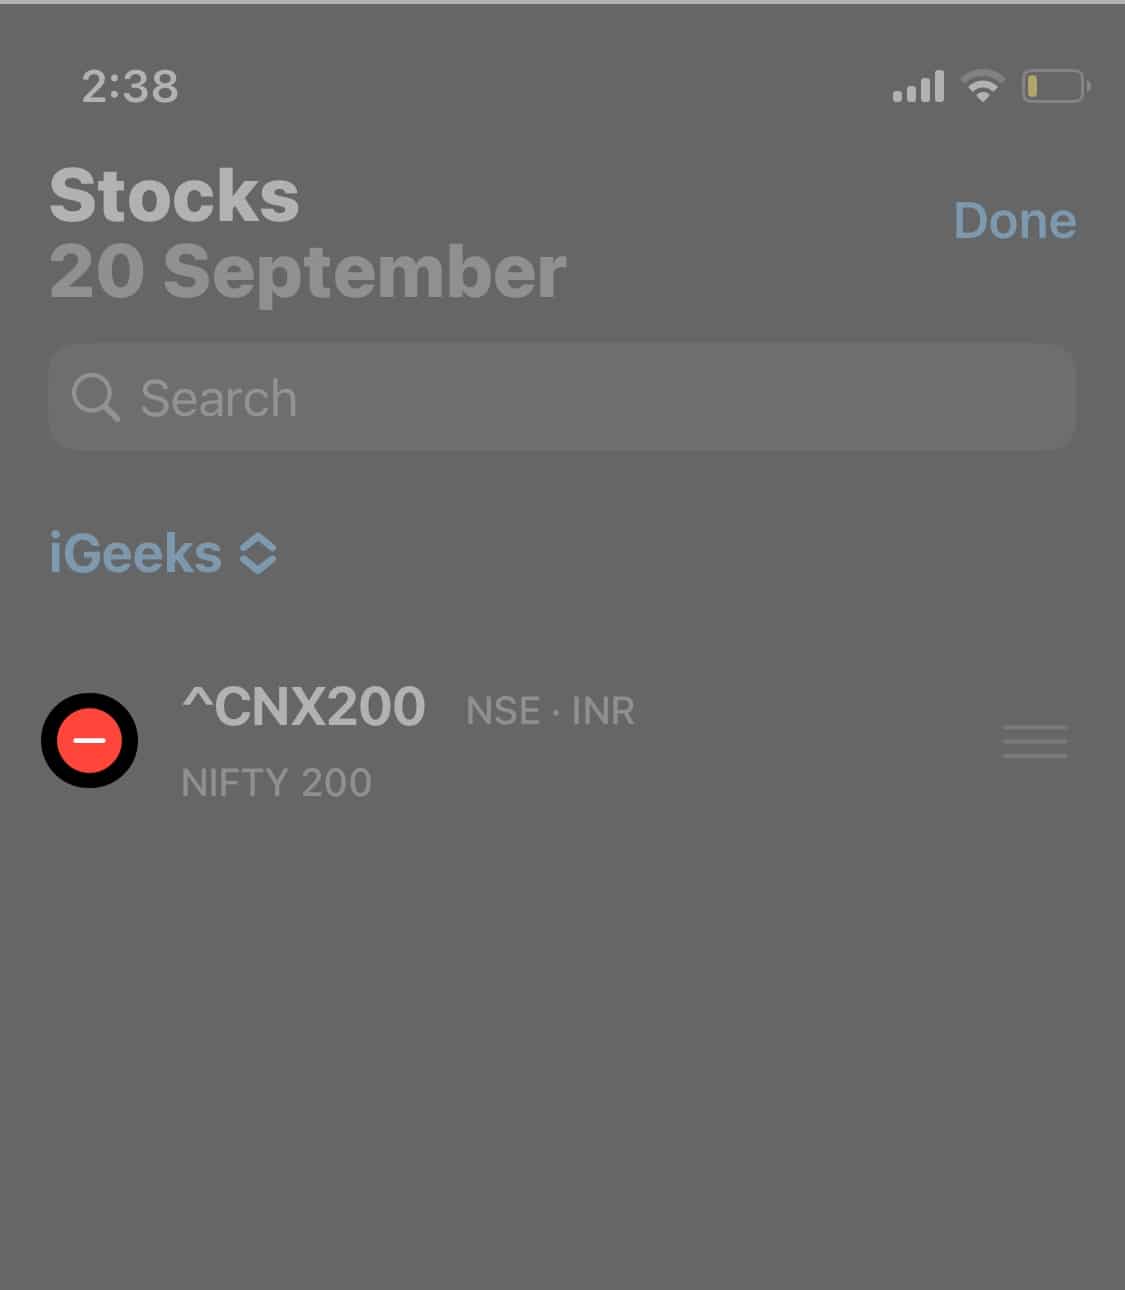 Removing stocks from the watchlist in Stocks app on an iPhone